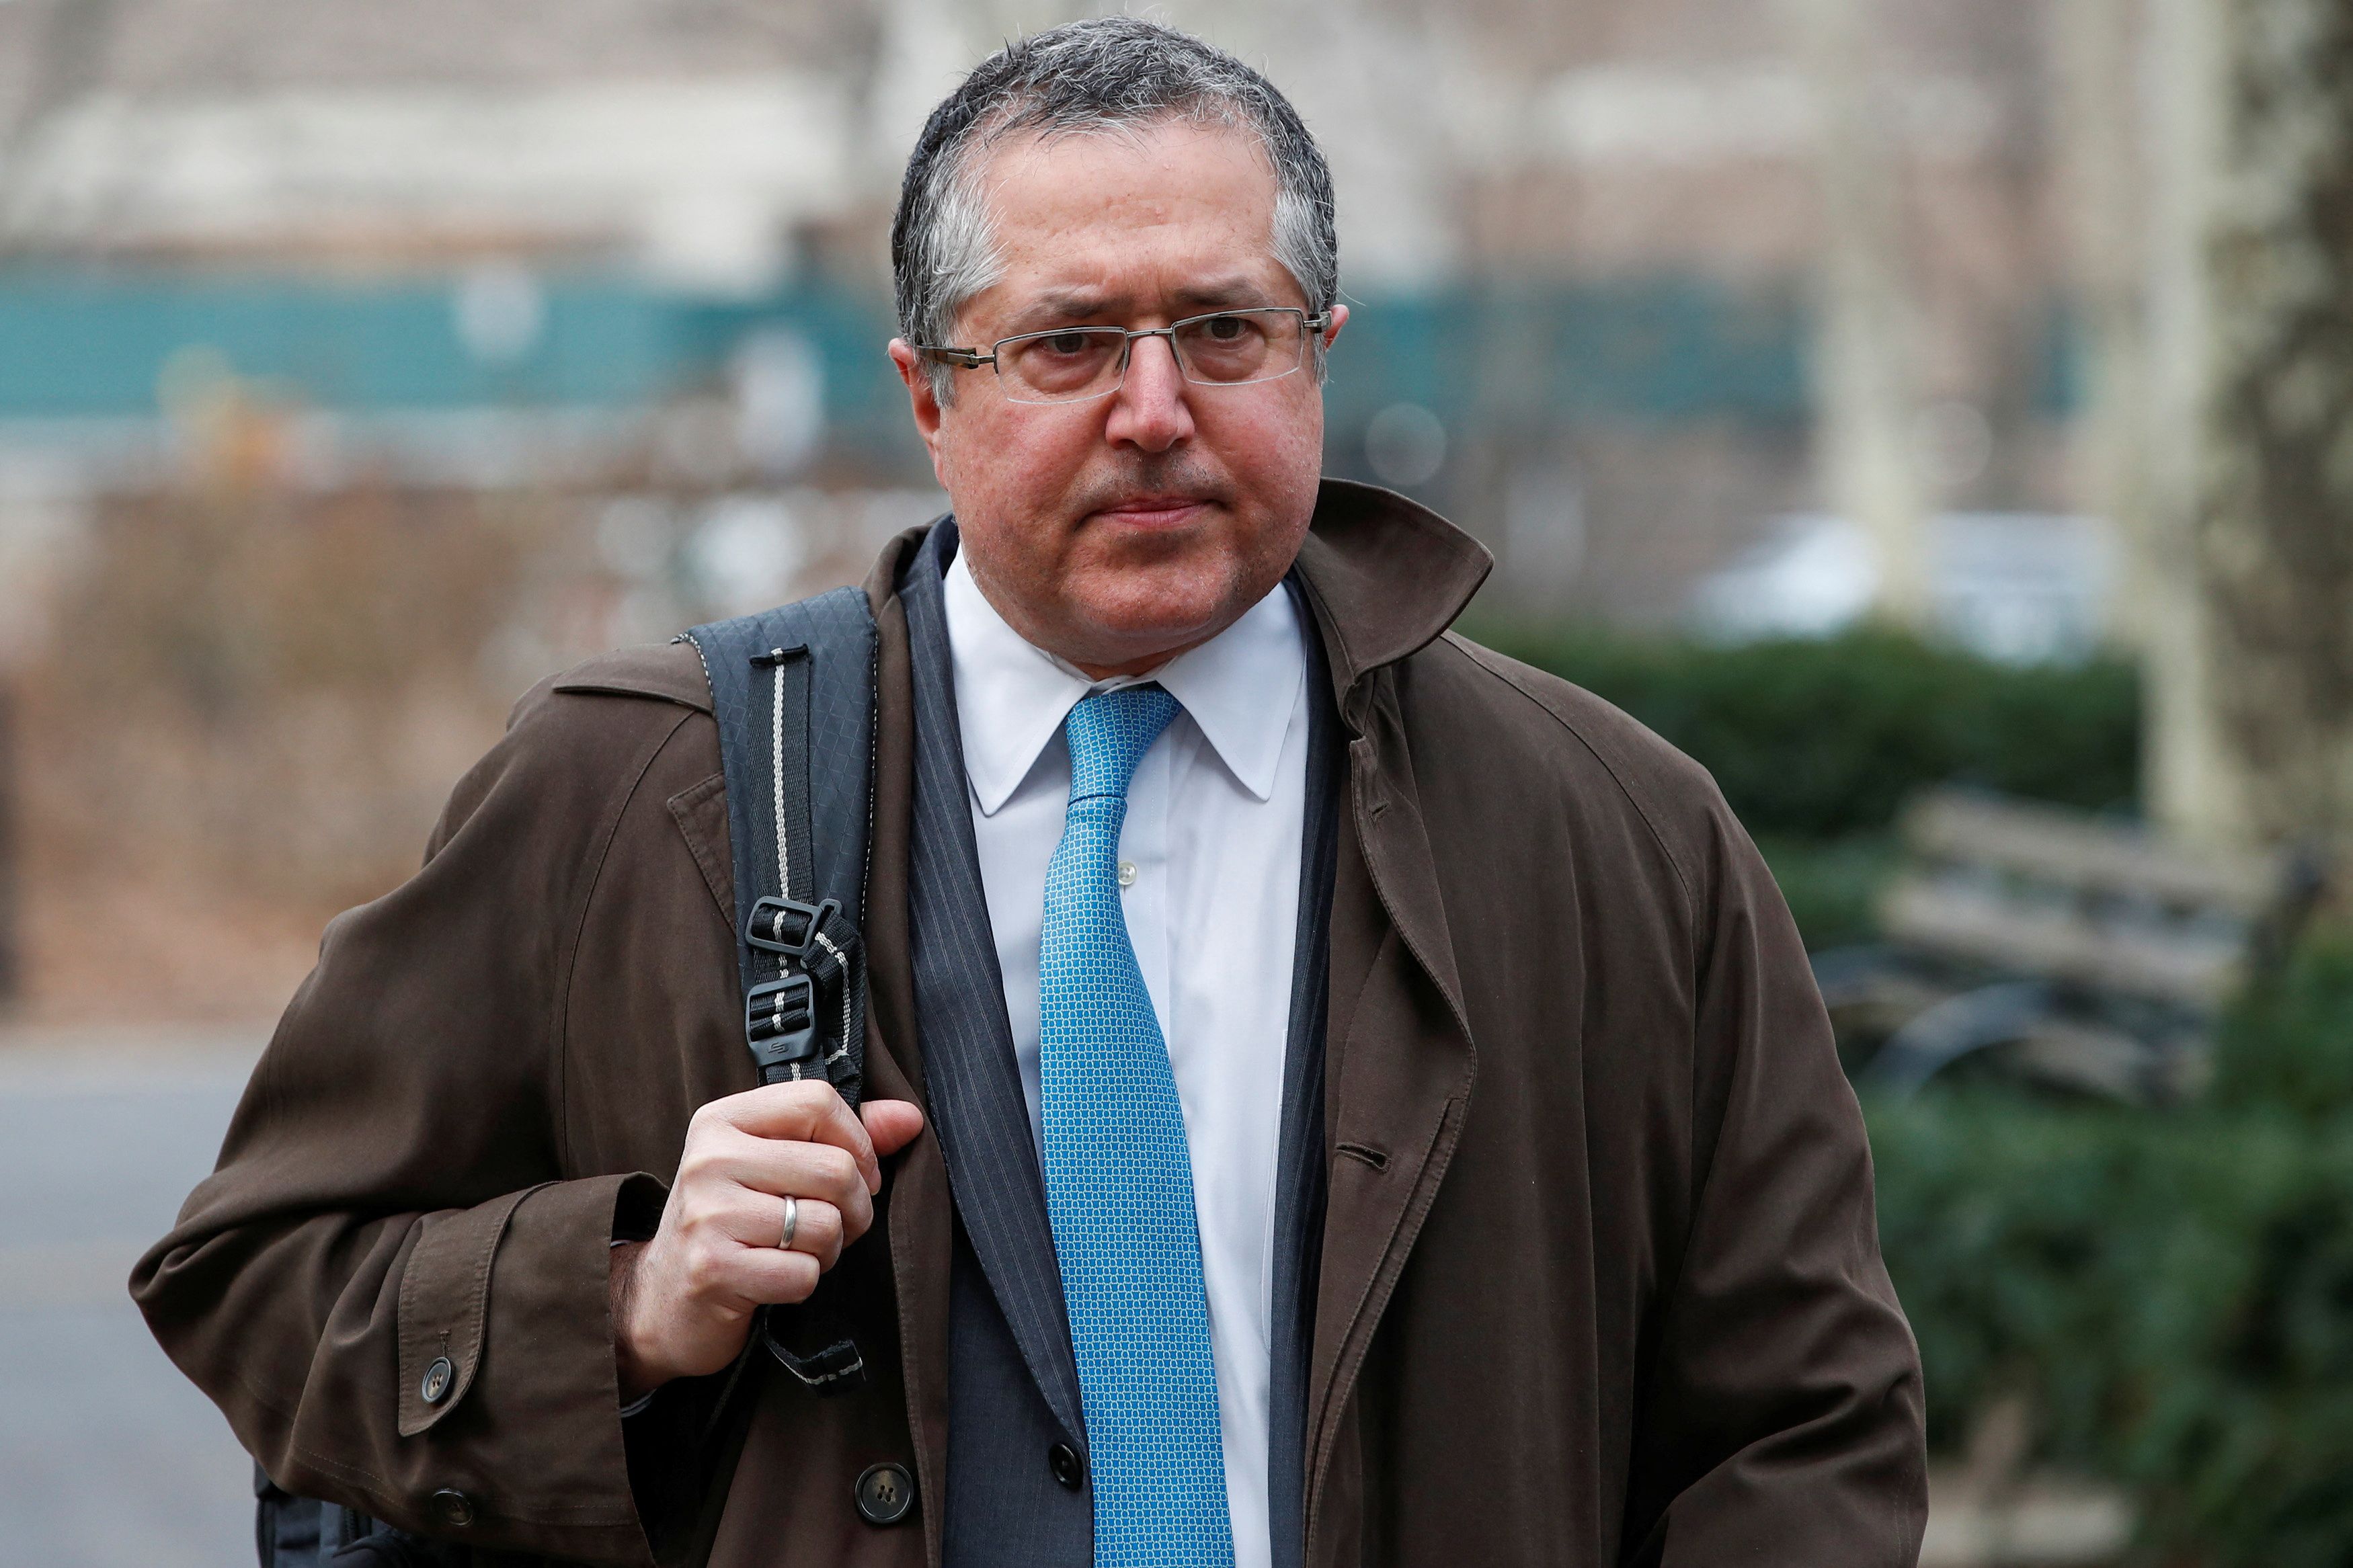 Marc Agnifilo, lawyer for Ex-Goldman Sachs banker Roger Ng, arrives for the criminal trial at the United States Courthouse in Brooklyn, New York